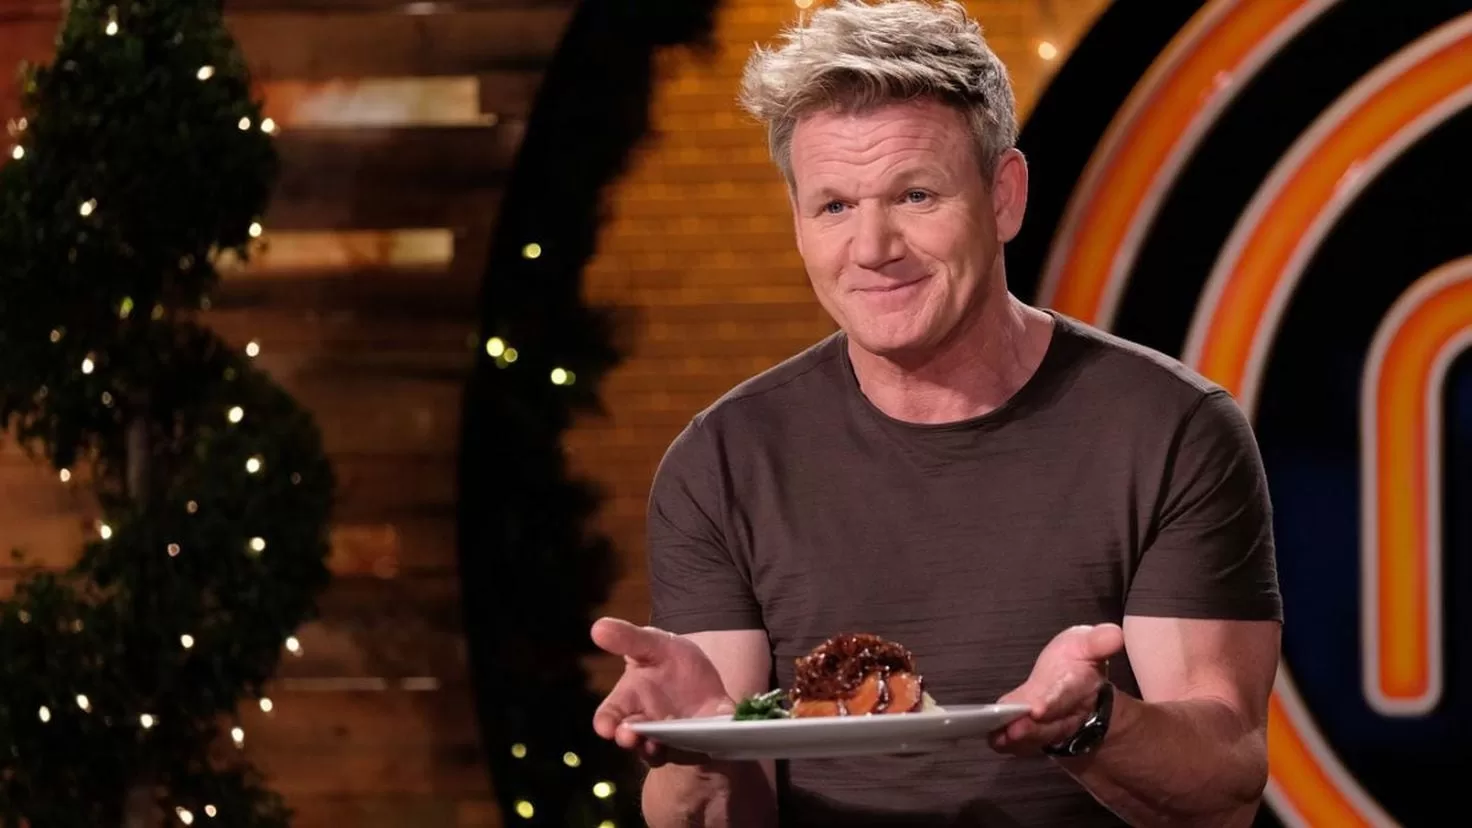 Chef Gordon Ramsay, father for the sixth time at 57
